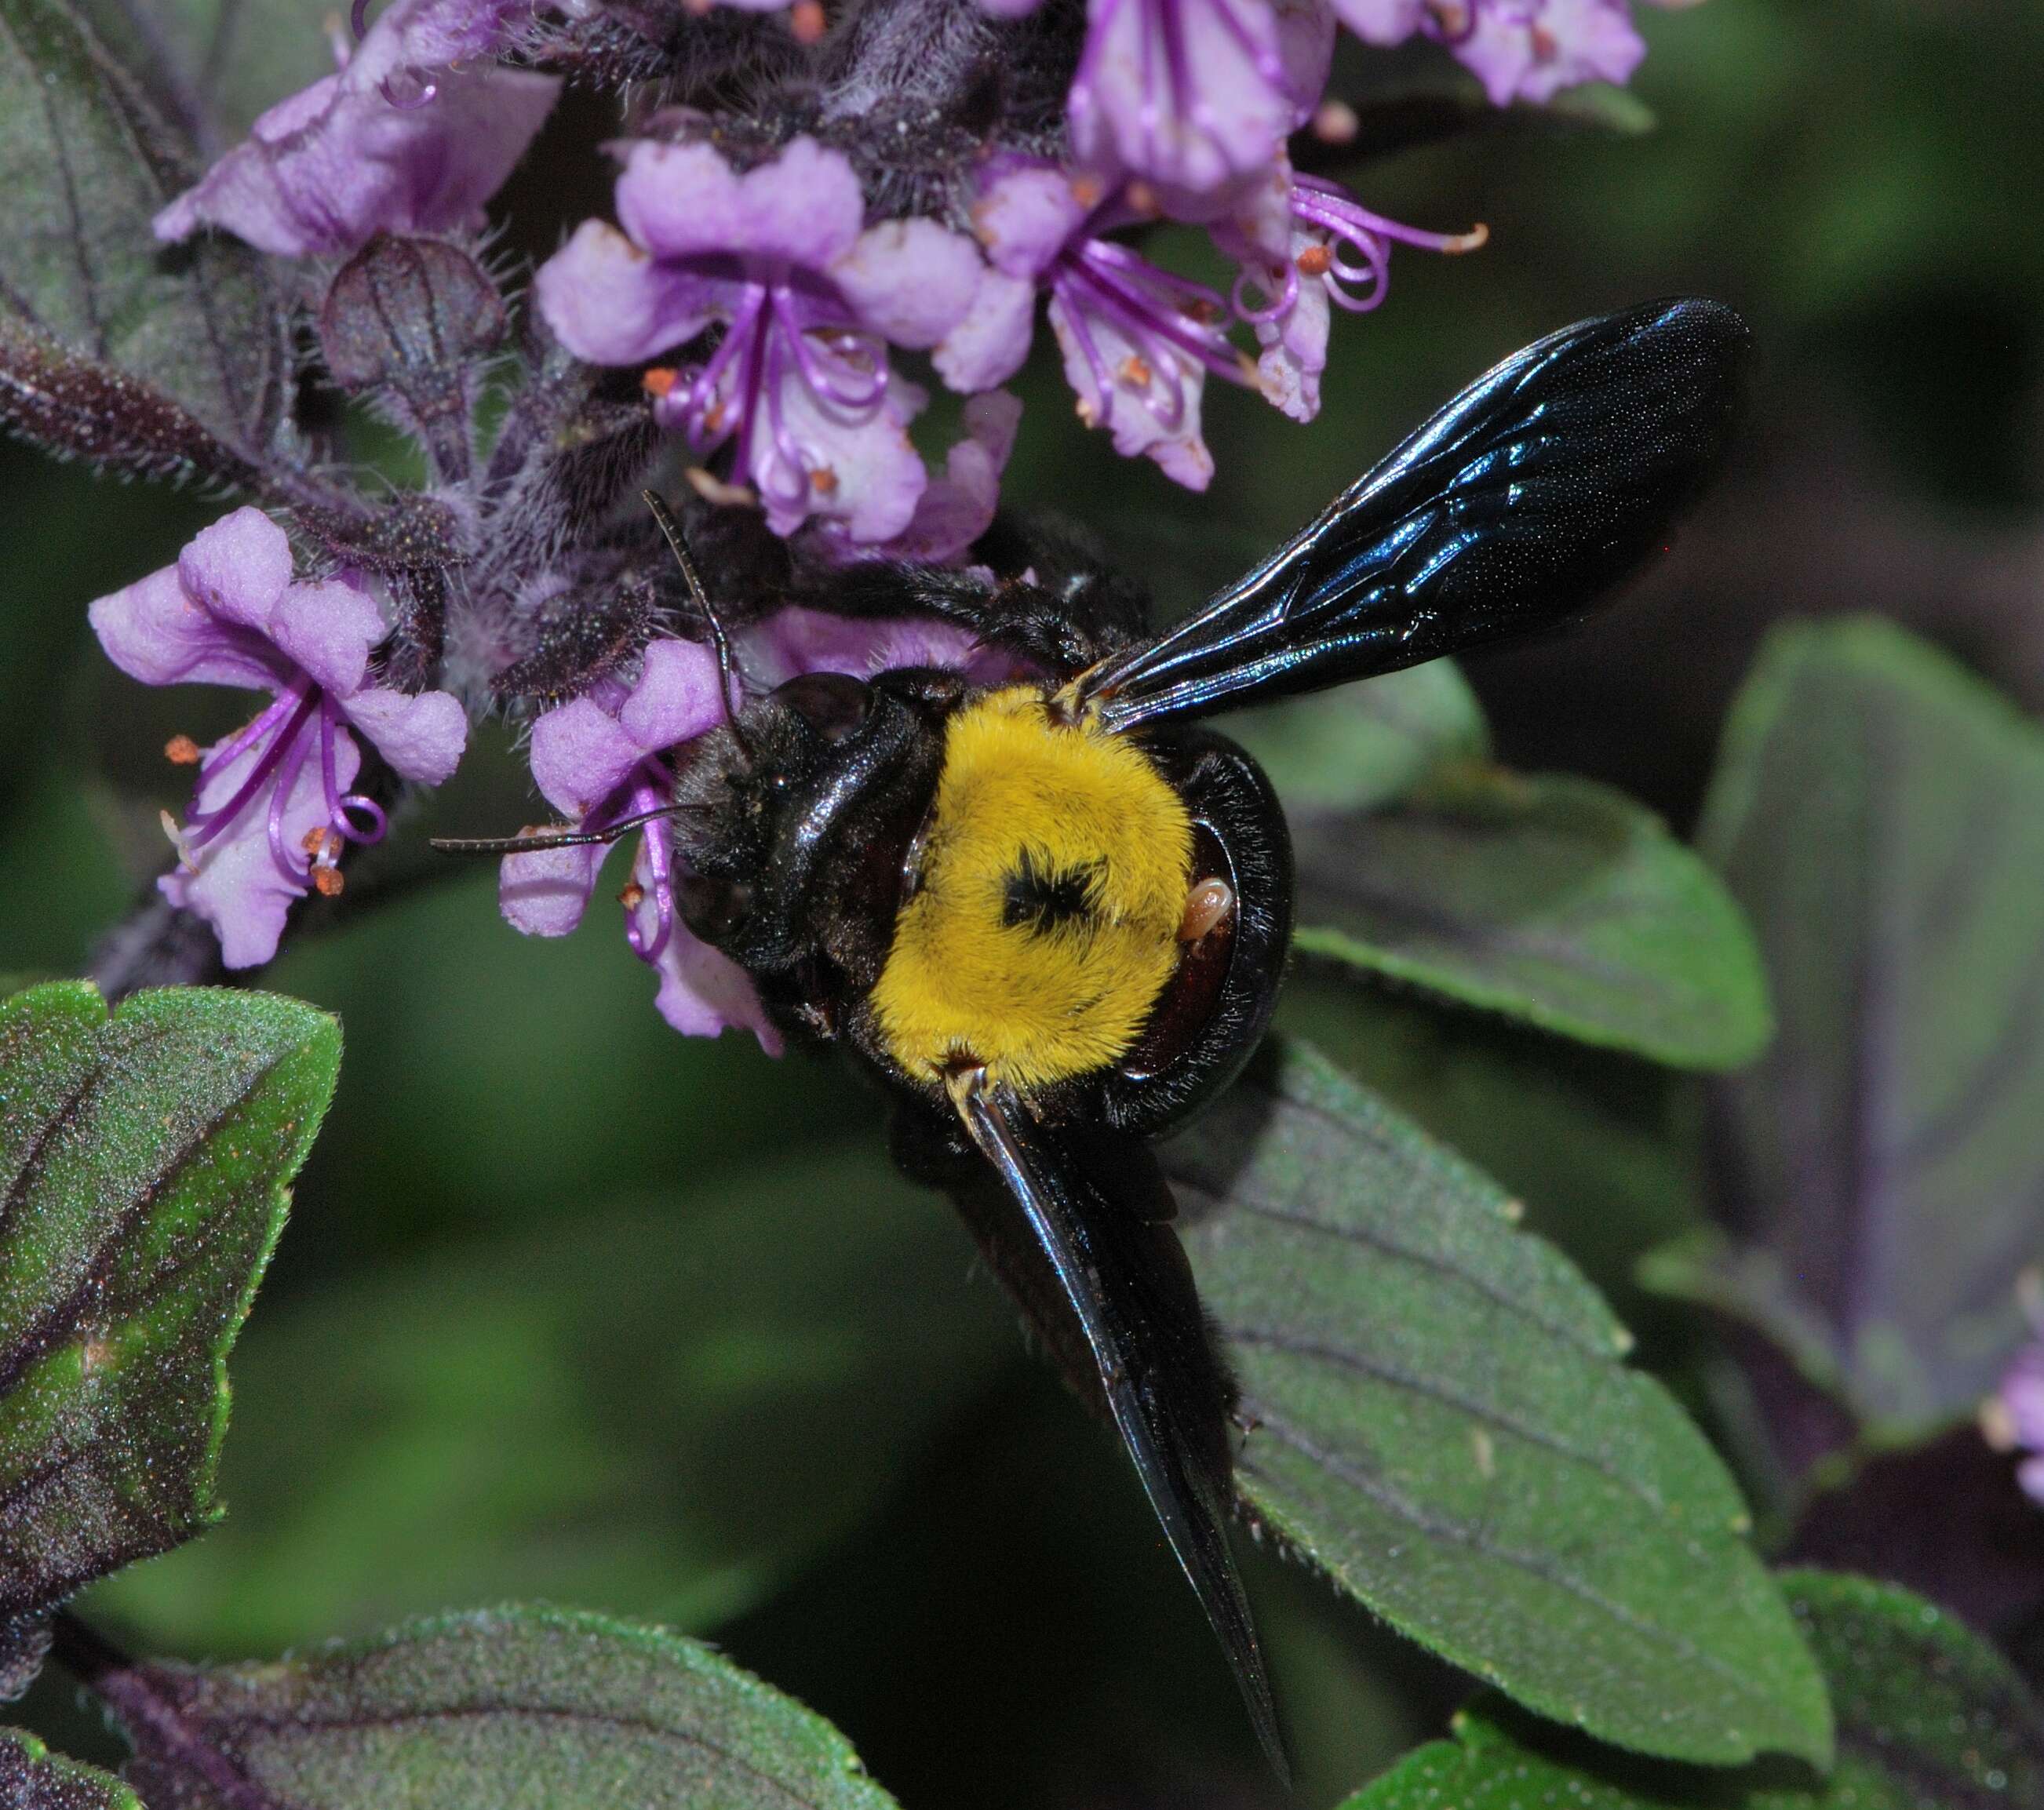 Image of Xylocopa pubescens Spinola 1838